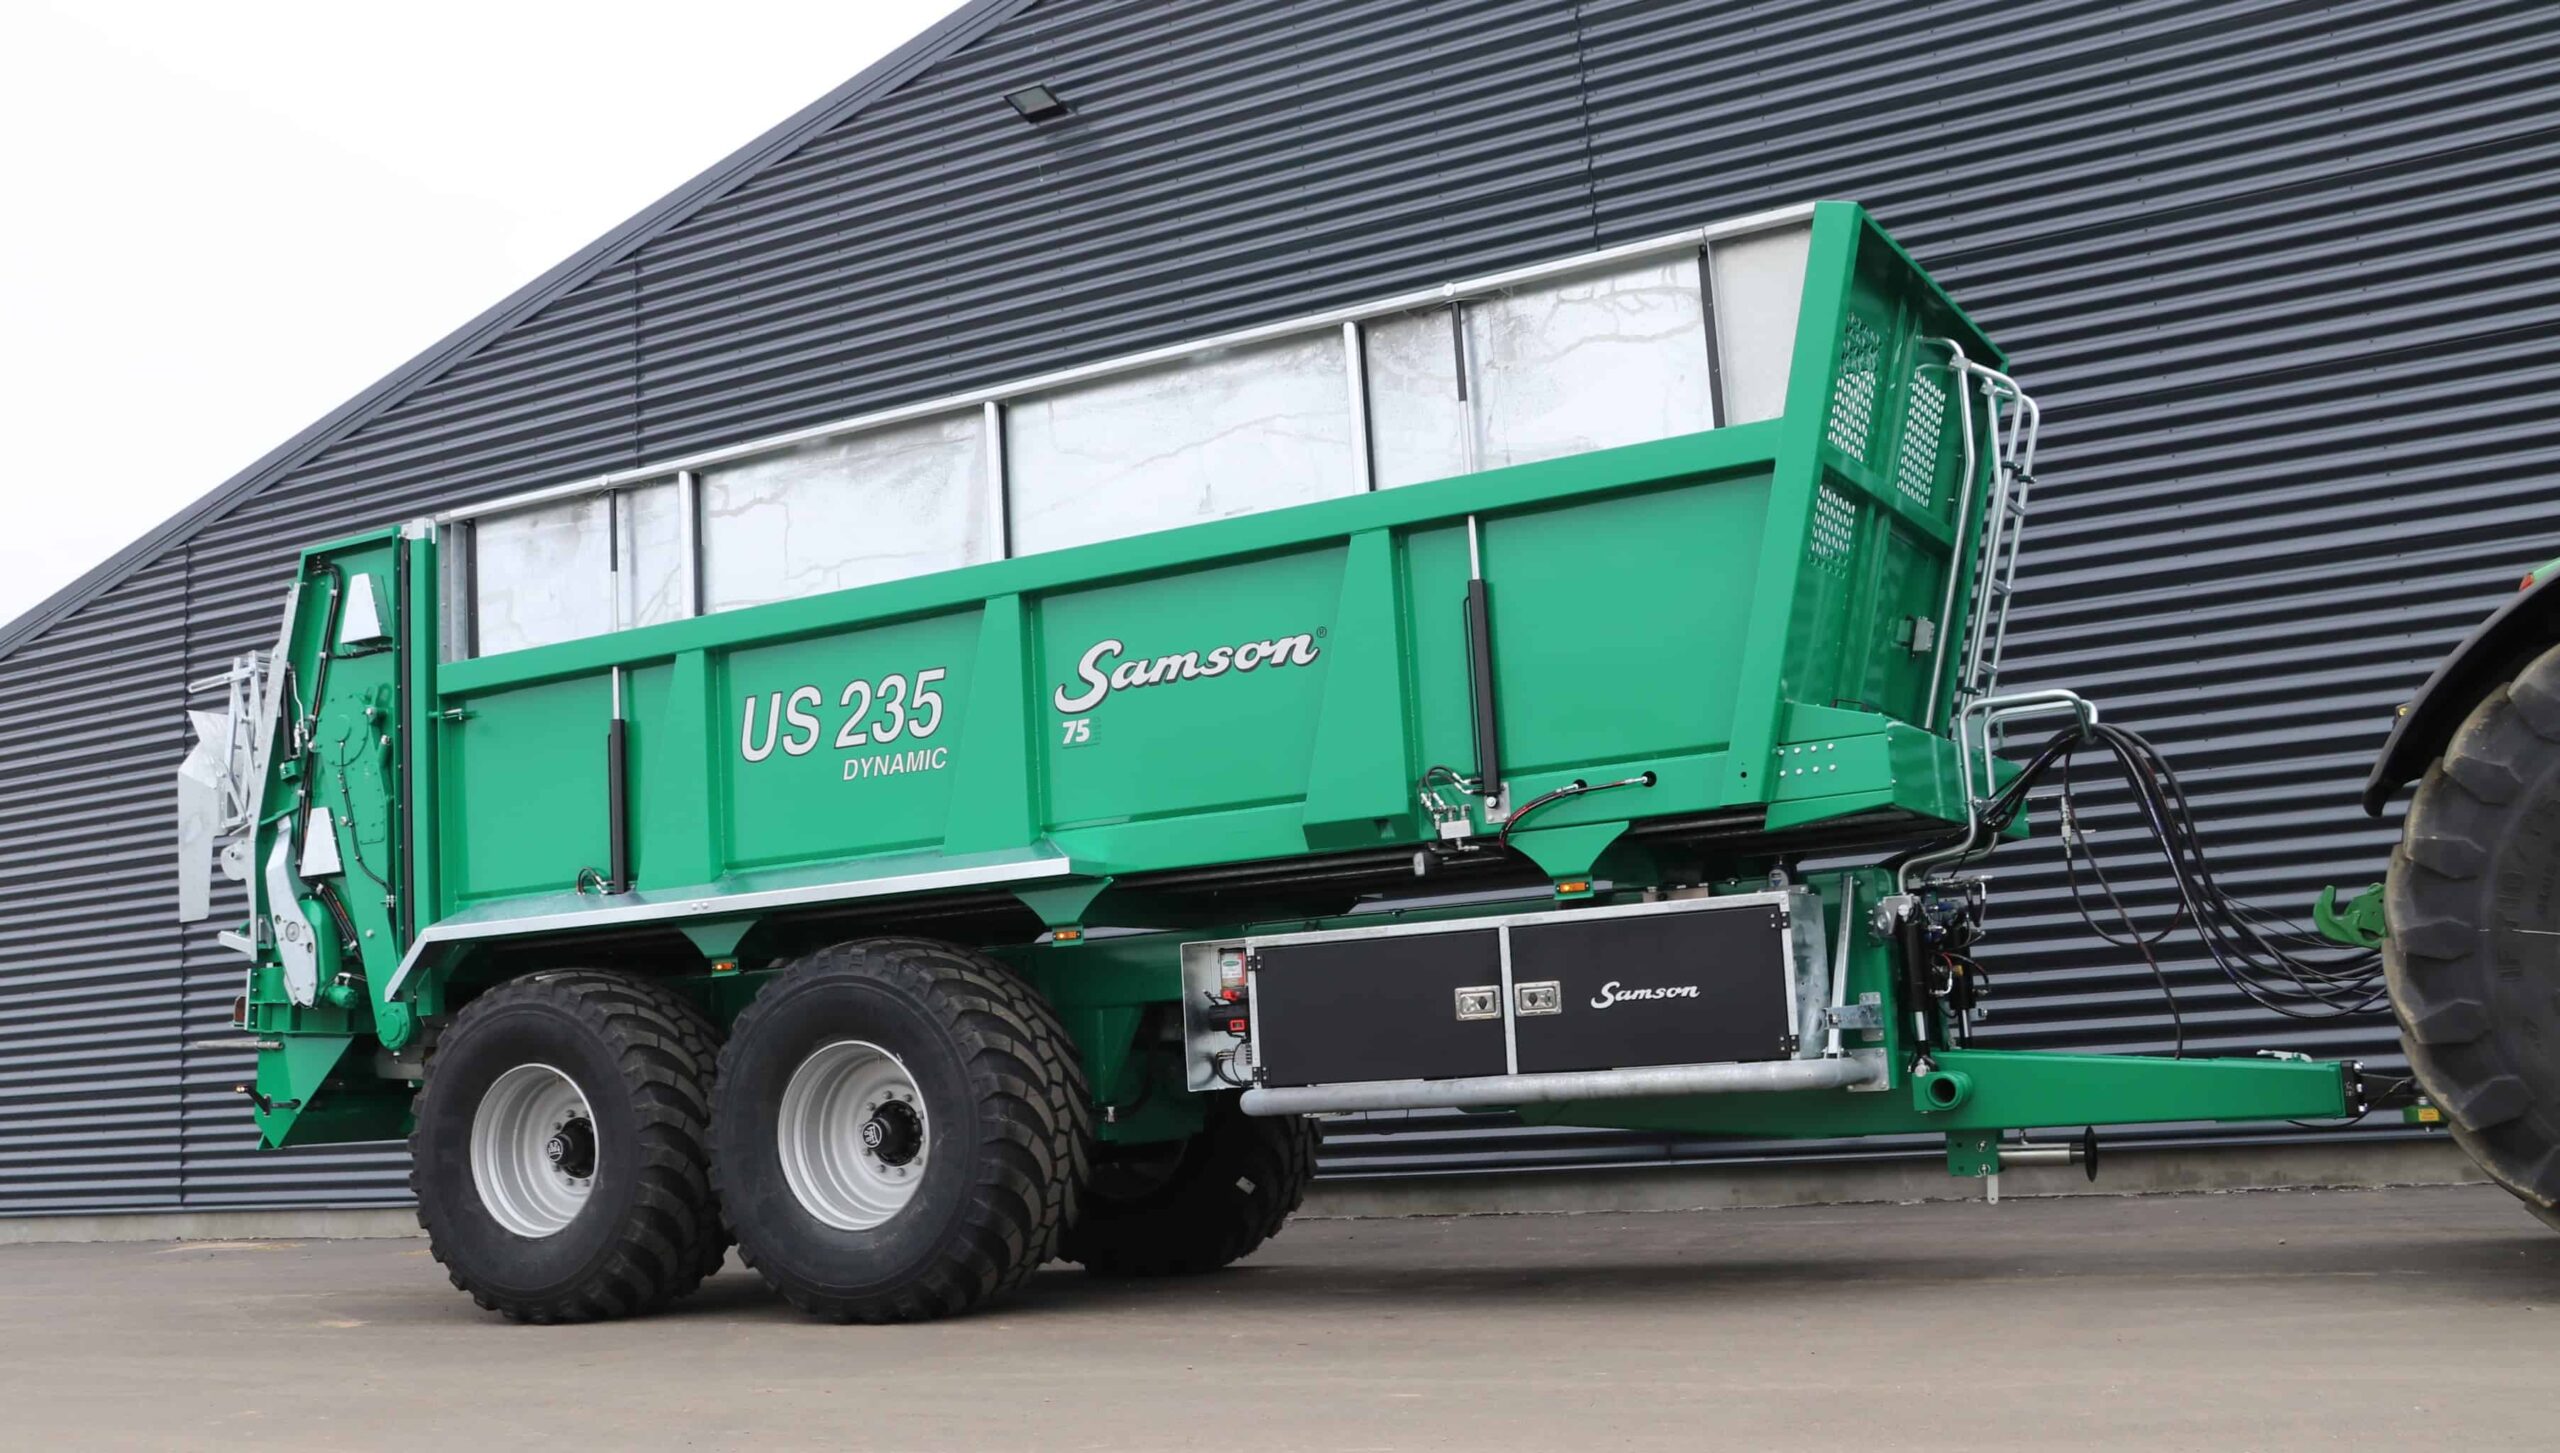 Samson introduces new 2-axle Universal Spreader and new unique patented hydraulic carpet chain tensioner